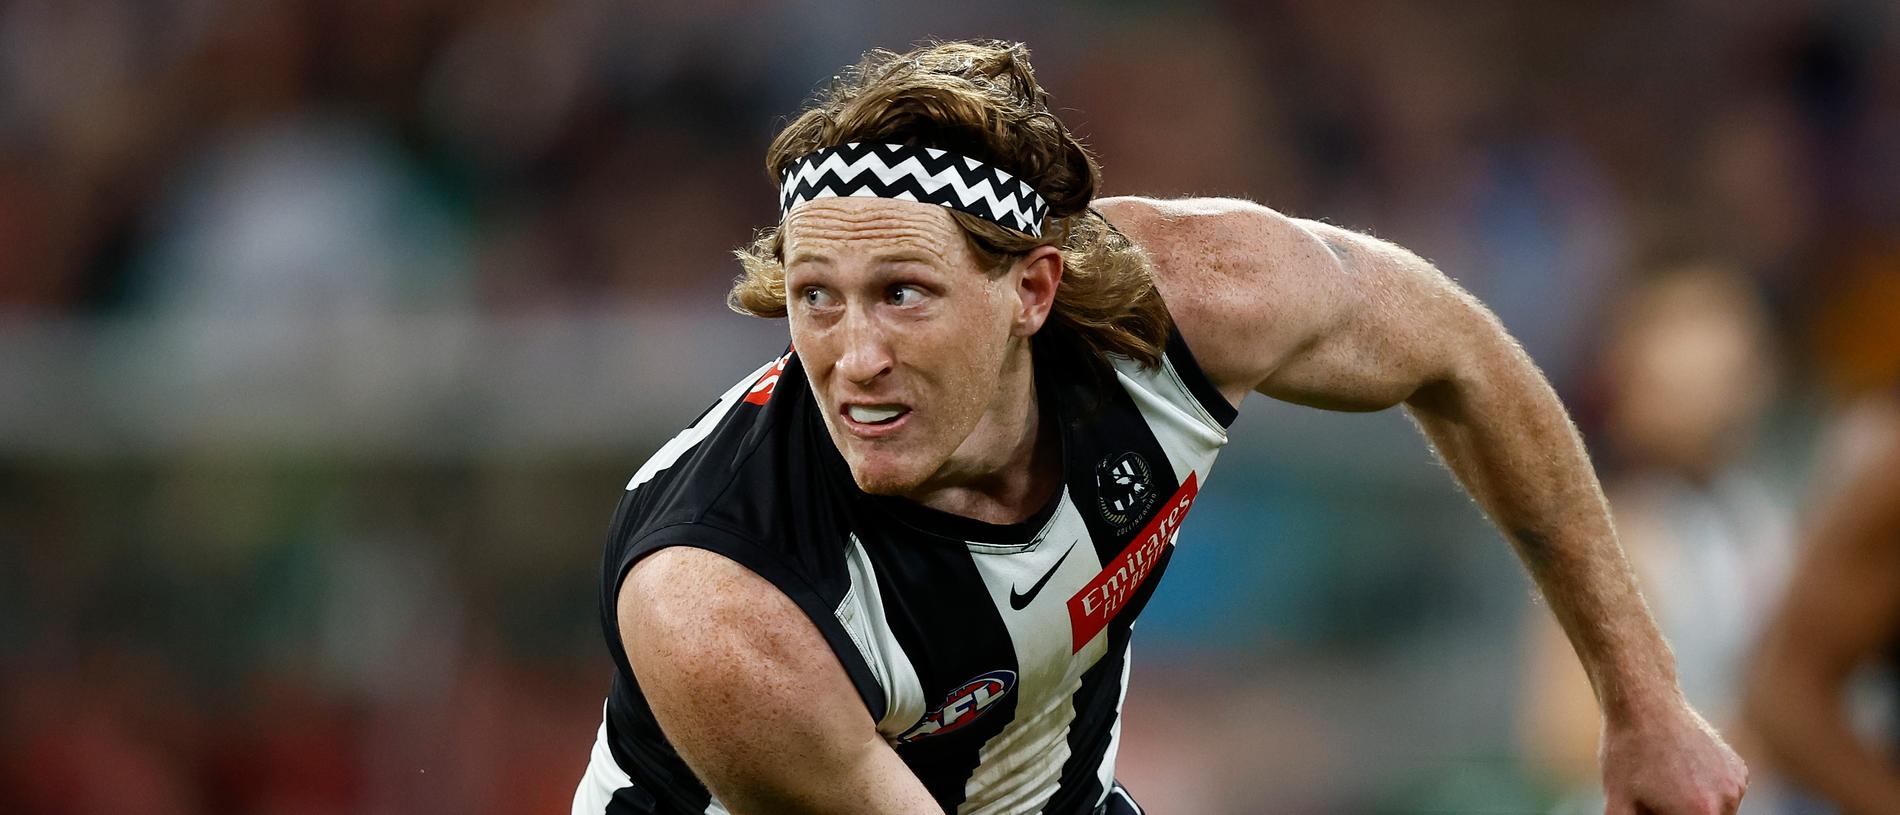 MELBOURNE, AUSTRALIA - SEPTEMBER 07: Nathan Murphy of the Magpies handpasses the ball during the 2023 AFL First Qualifying Final match between the Collingwood Magpies and the Melbourne Demons at Melbourne Cricket Ground on September 07, 2023 in Melbourne, Australia. (Photo by Michael Willson/AFL Photos via Getty Images)